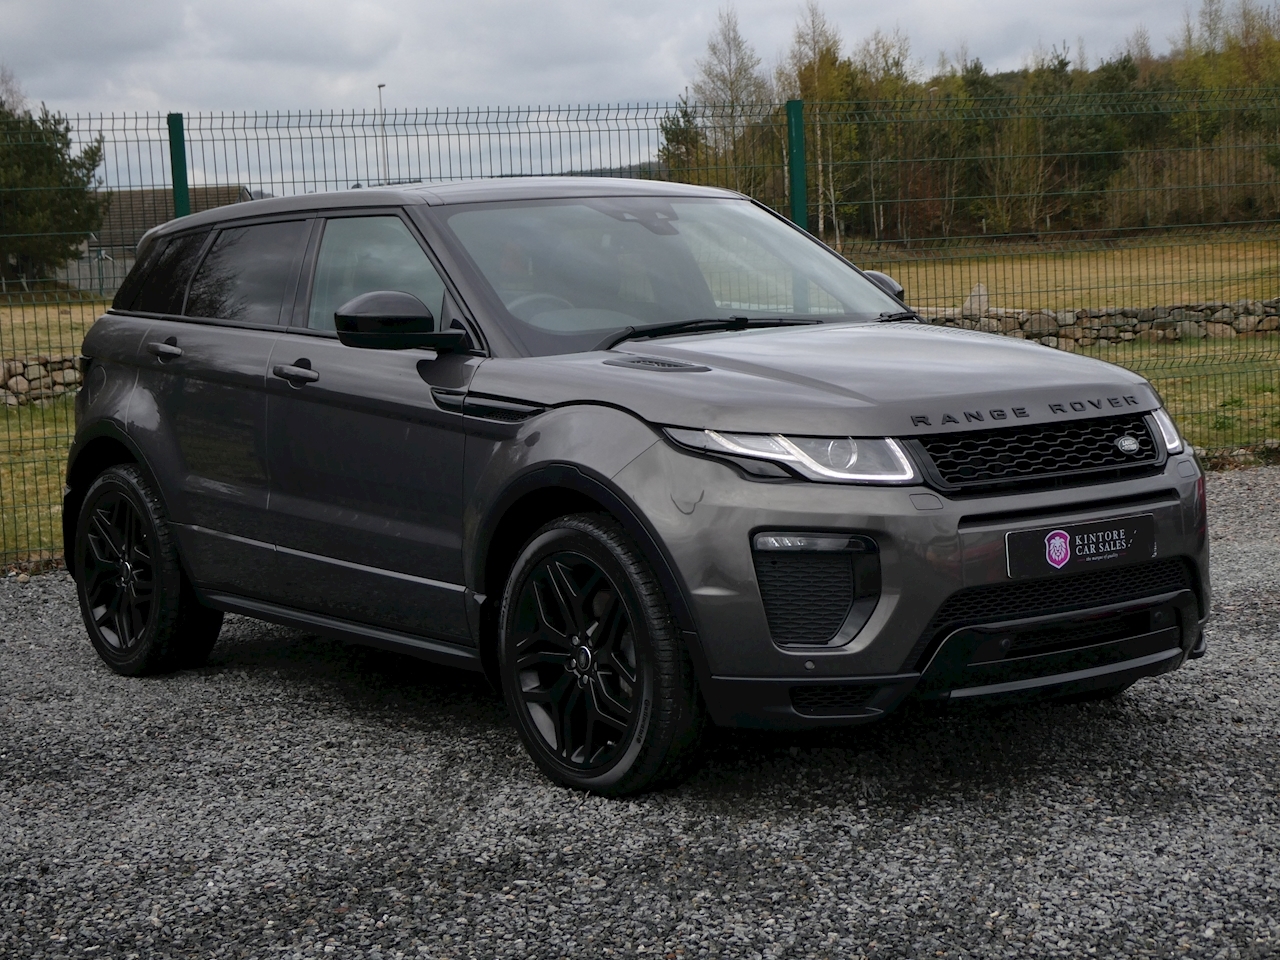 Range Rover Evoque 2.0 TD4 HSE Dynamic 4WD Auto 2.0 5dr SUV Automatic Diesel